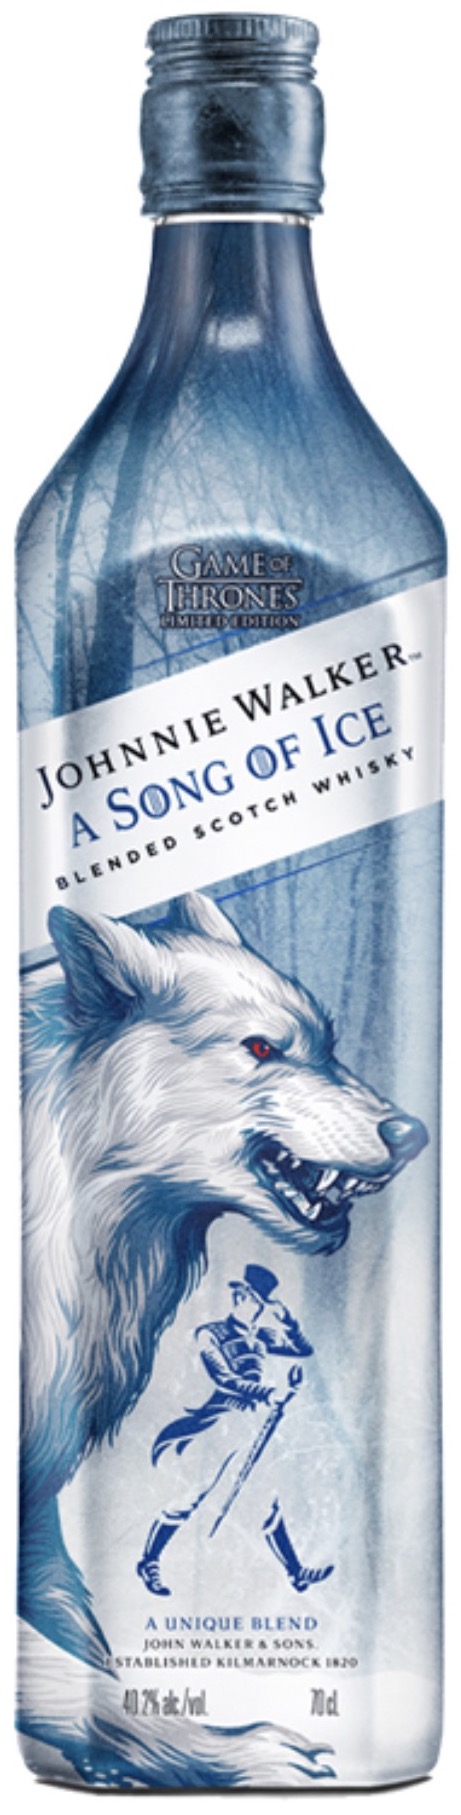 Johnnie Walker A Song of Ice Game of Thrones GoT Blended Scotch Whisky 40,2 % 0,7 l